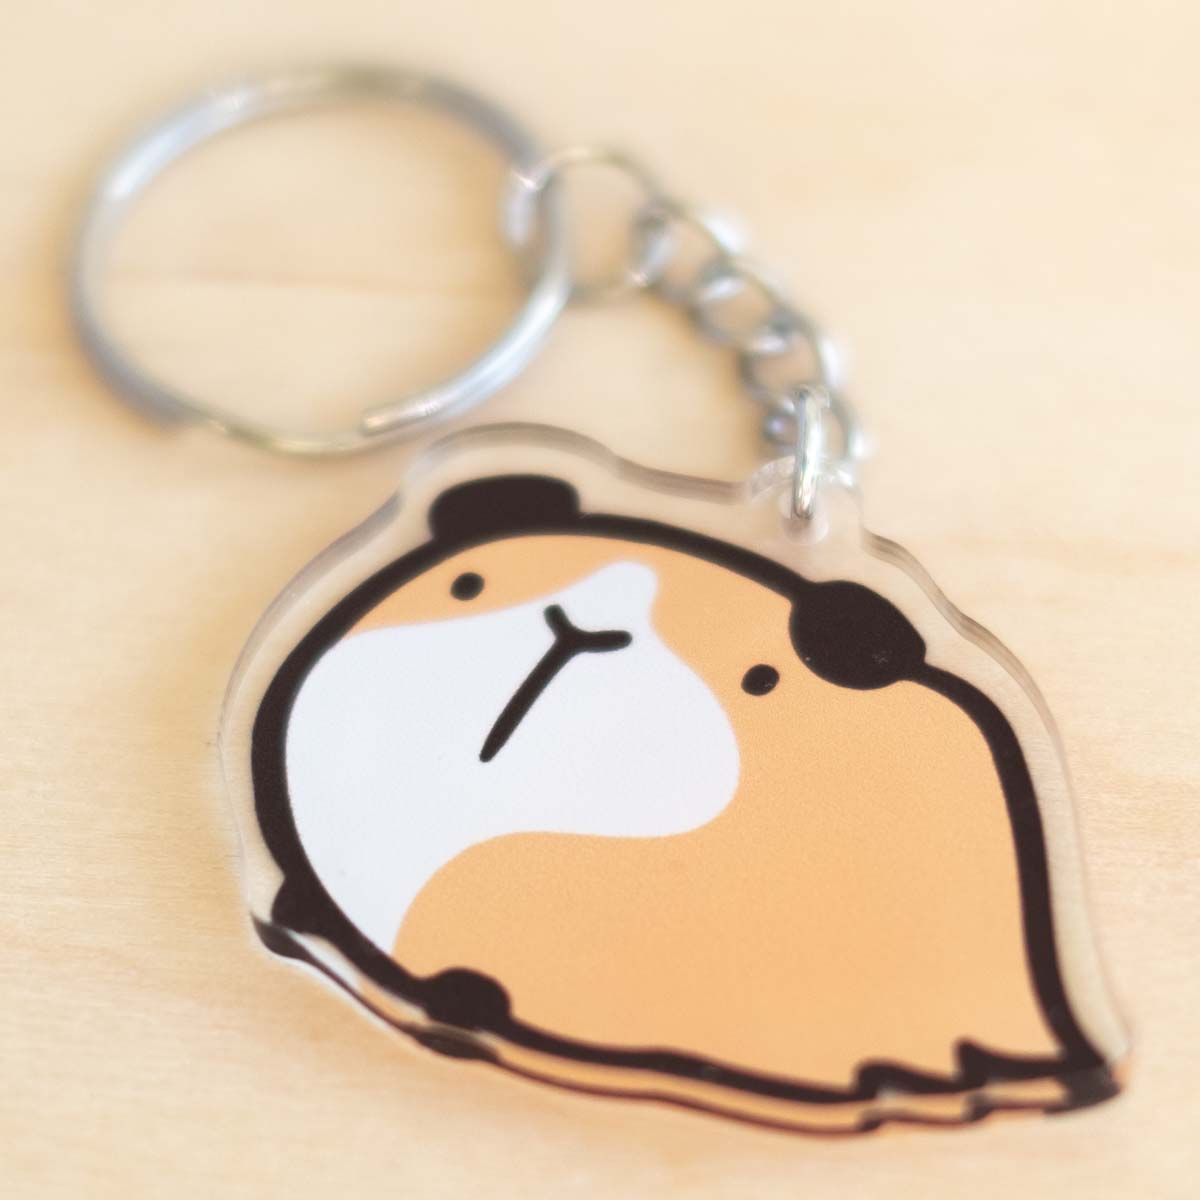 Keychain - PP Guinea pig, brown & white